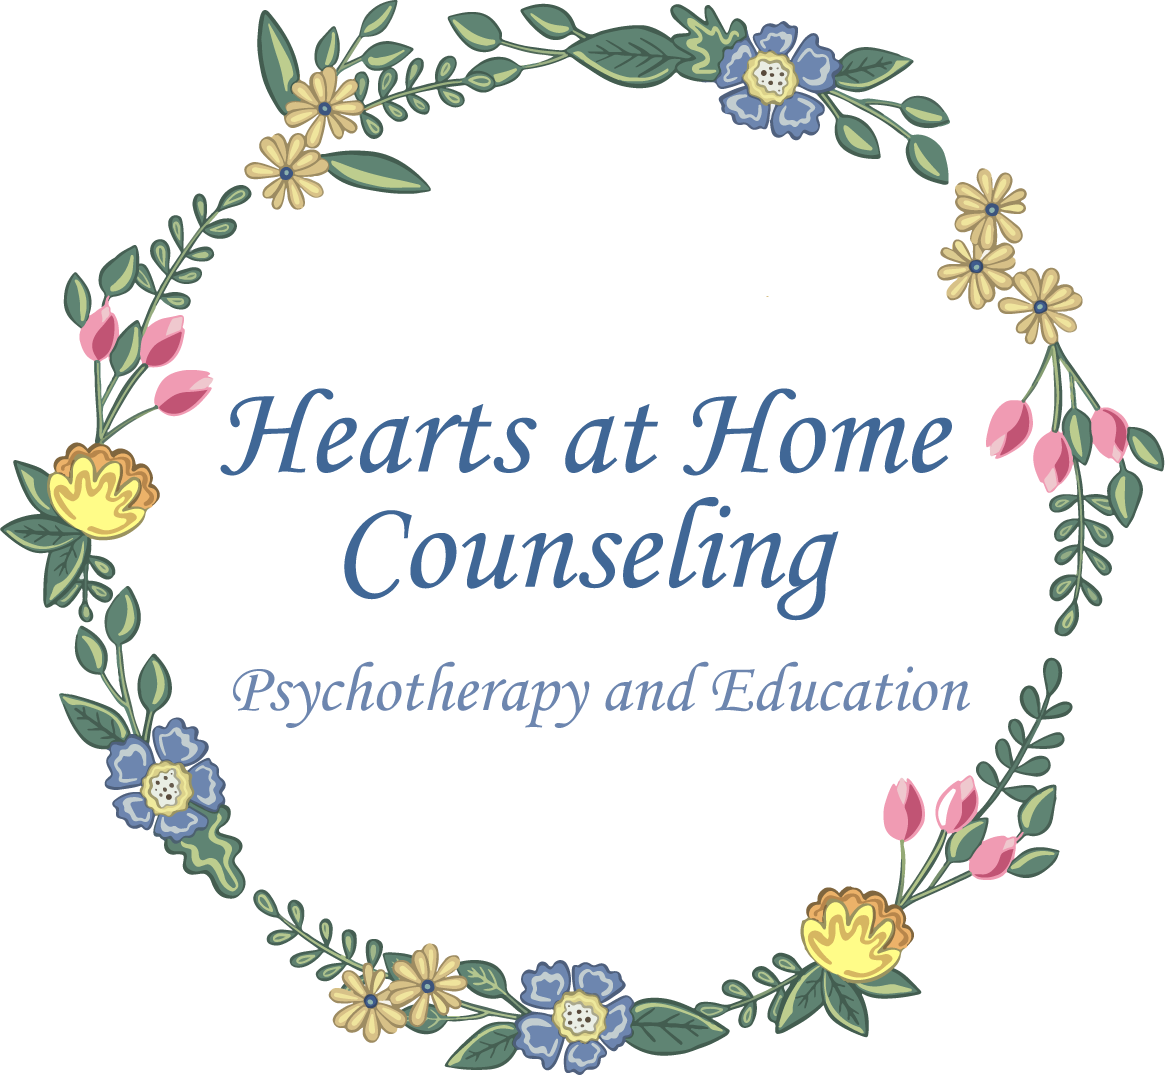 Hearts at Home Counseling